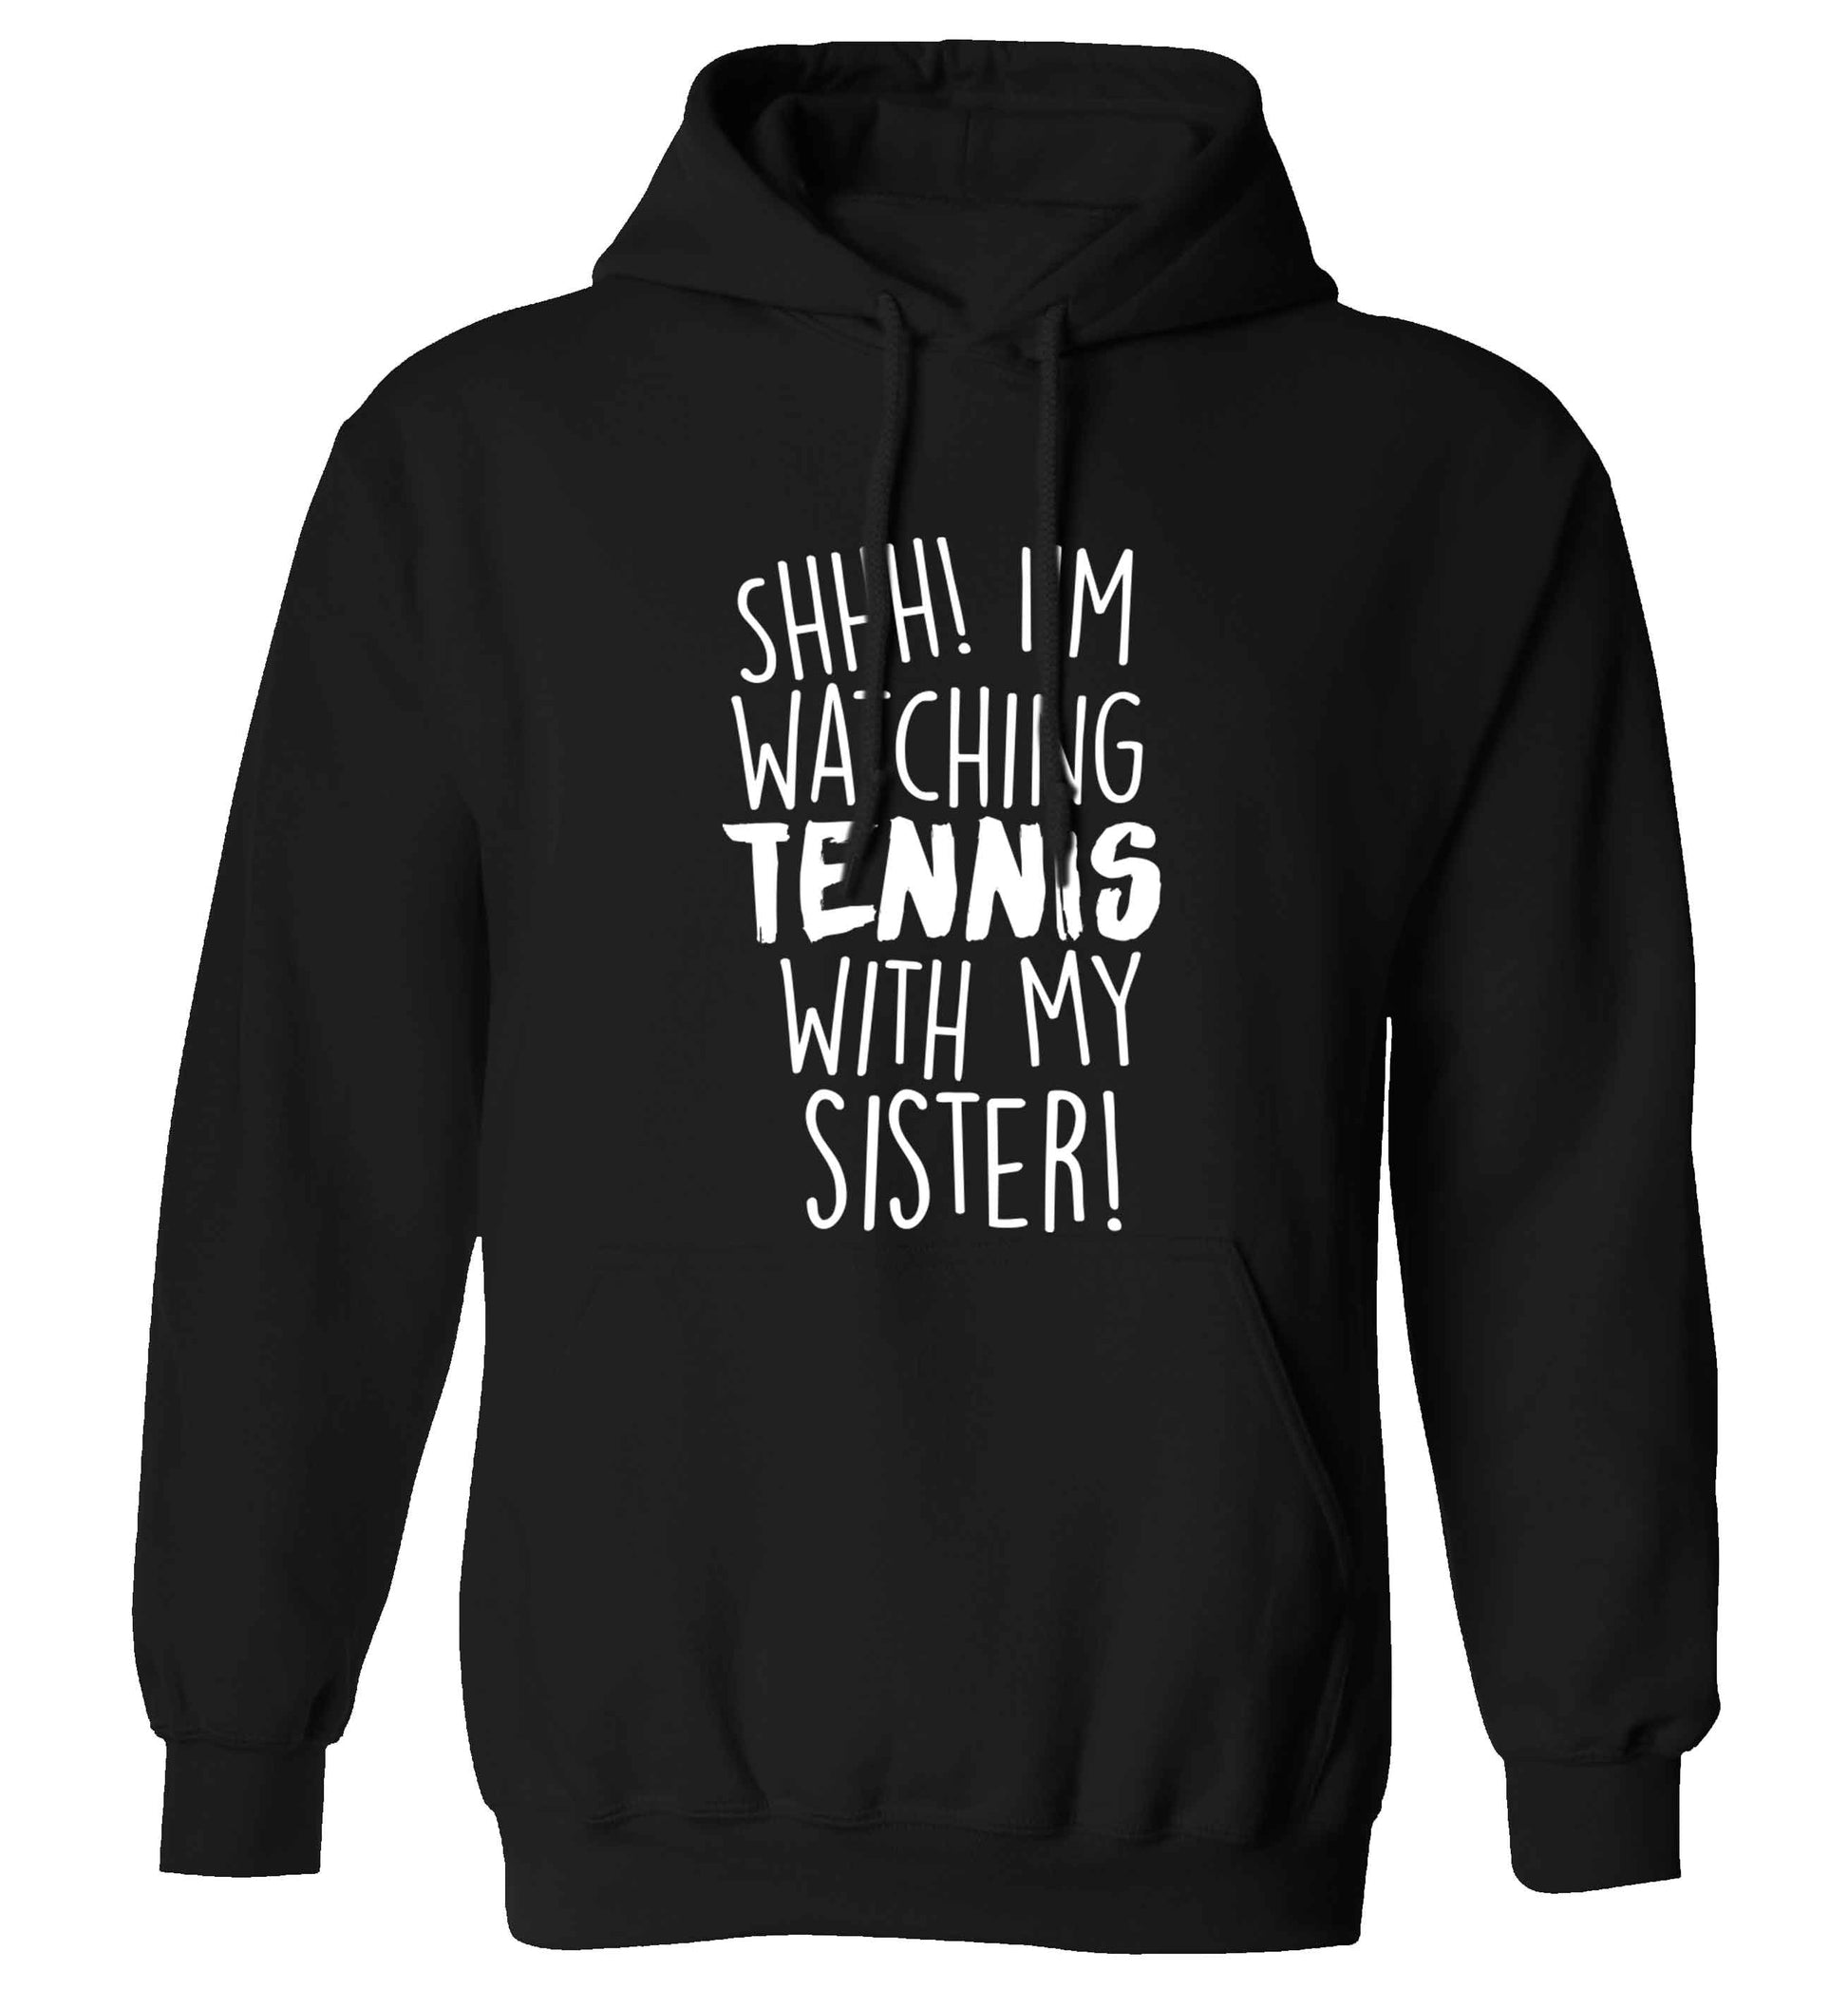 Shh! I'm watching tennis with my sister! adults unisex black hoodie 2XL